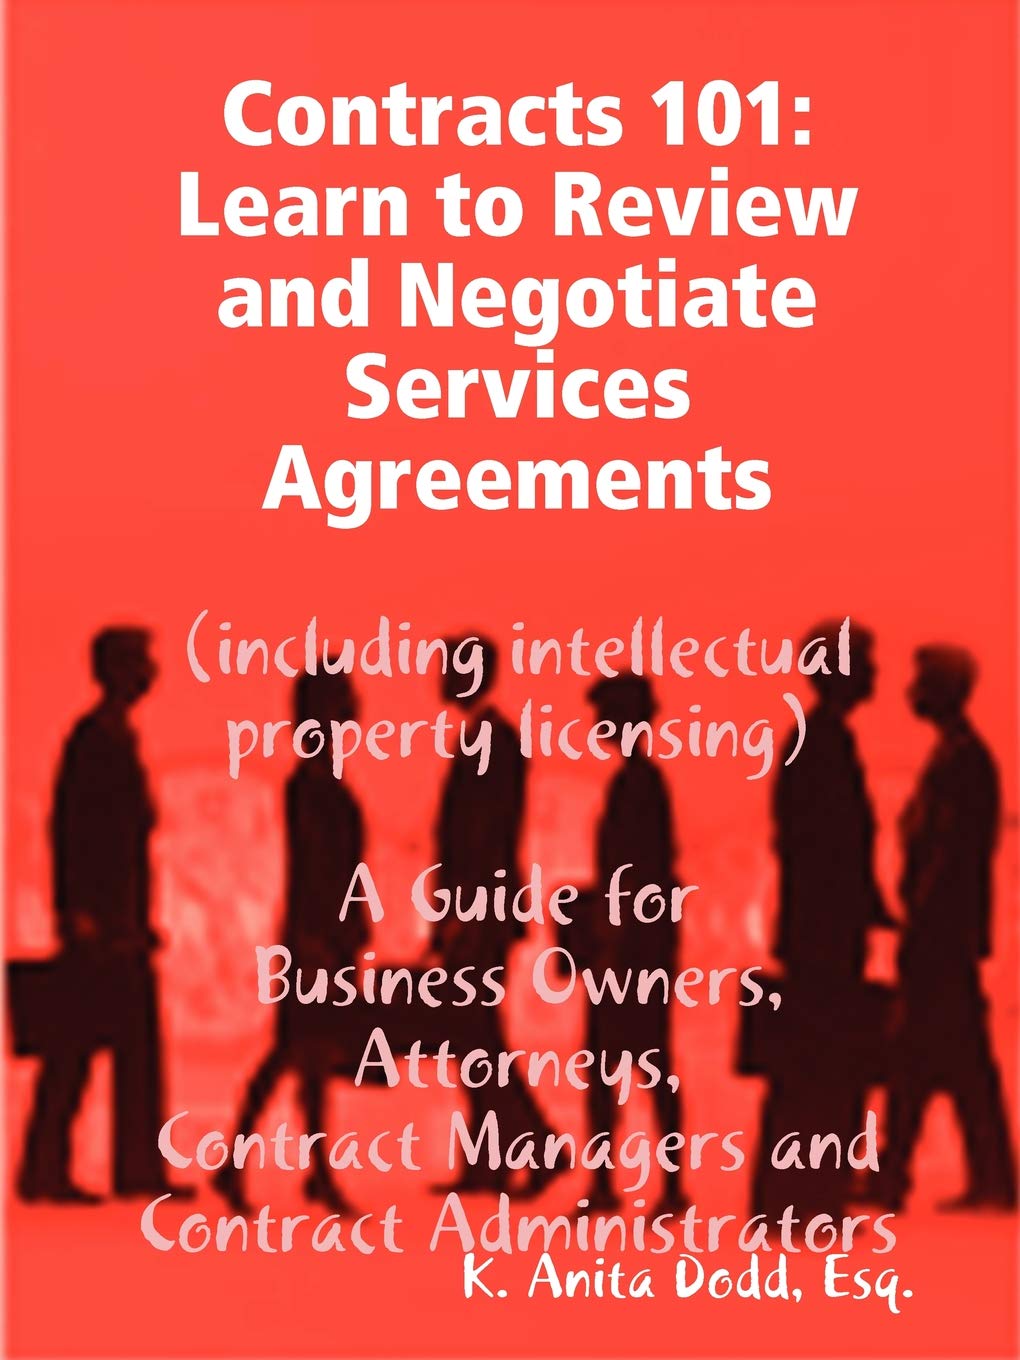 Contracts 101: Learn to Review and Negotiate Services Agreements (including intellectual property licensing)